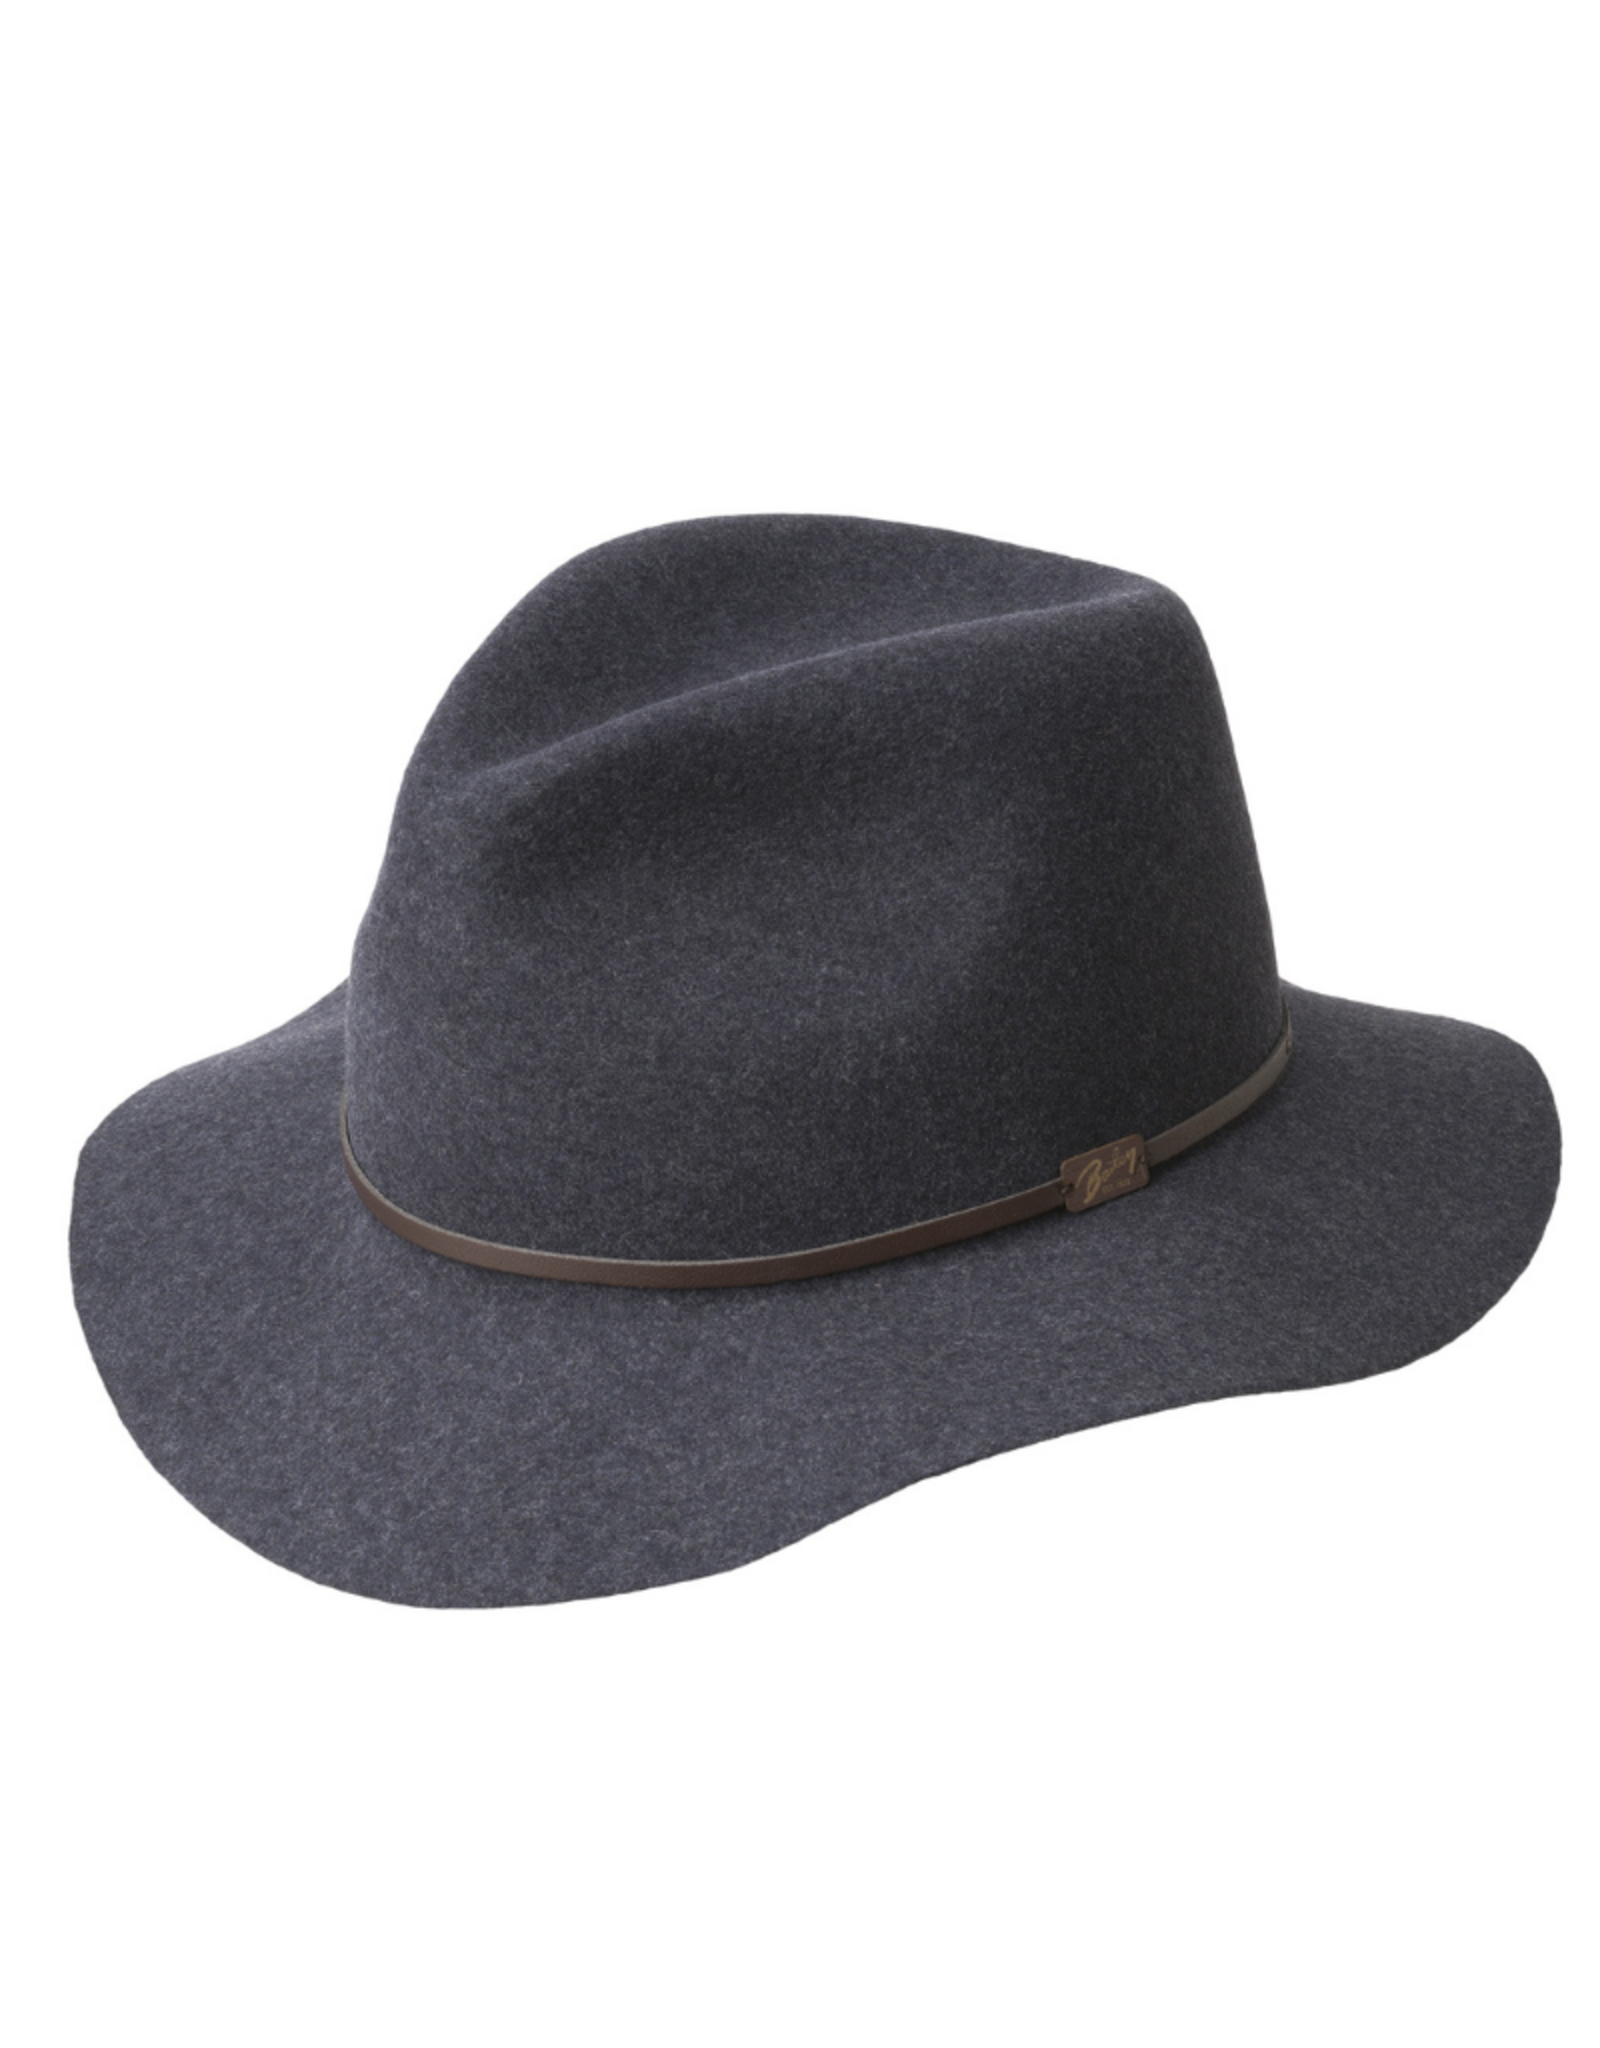 Bailey Hat Co. HAT-FEDORA "JACKMAN"ROLL UP